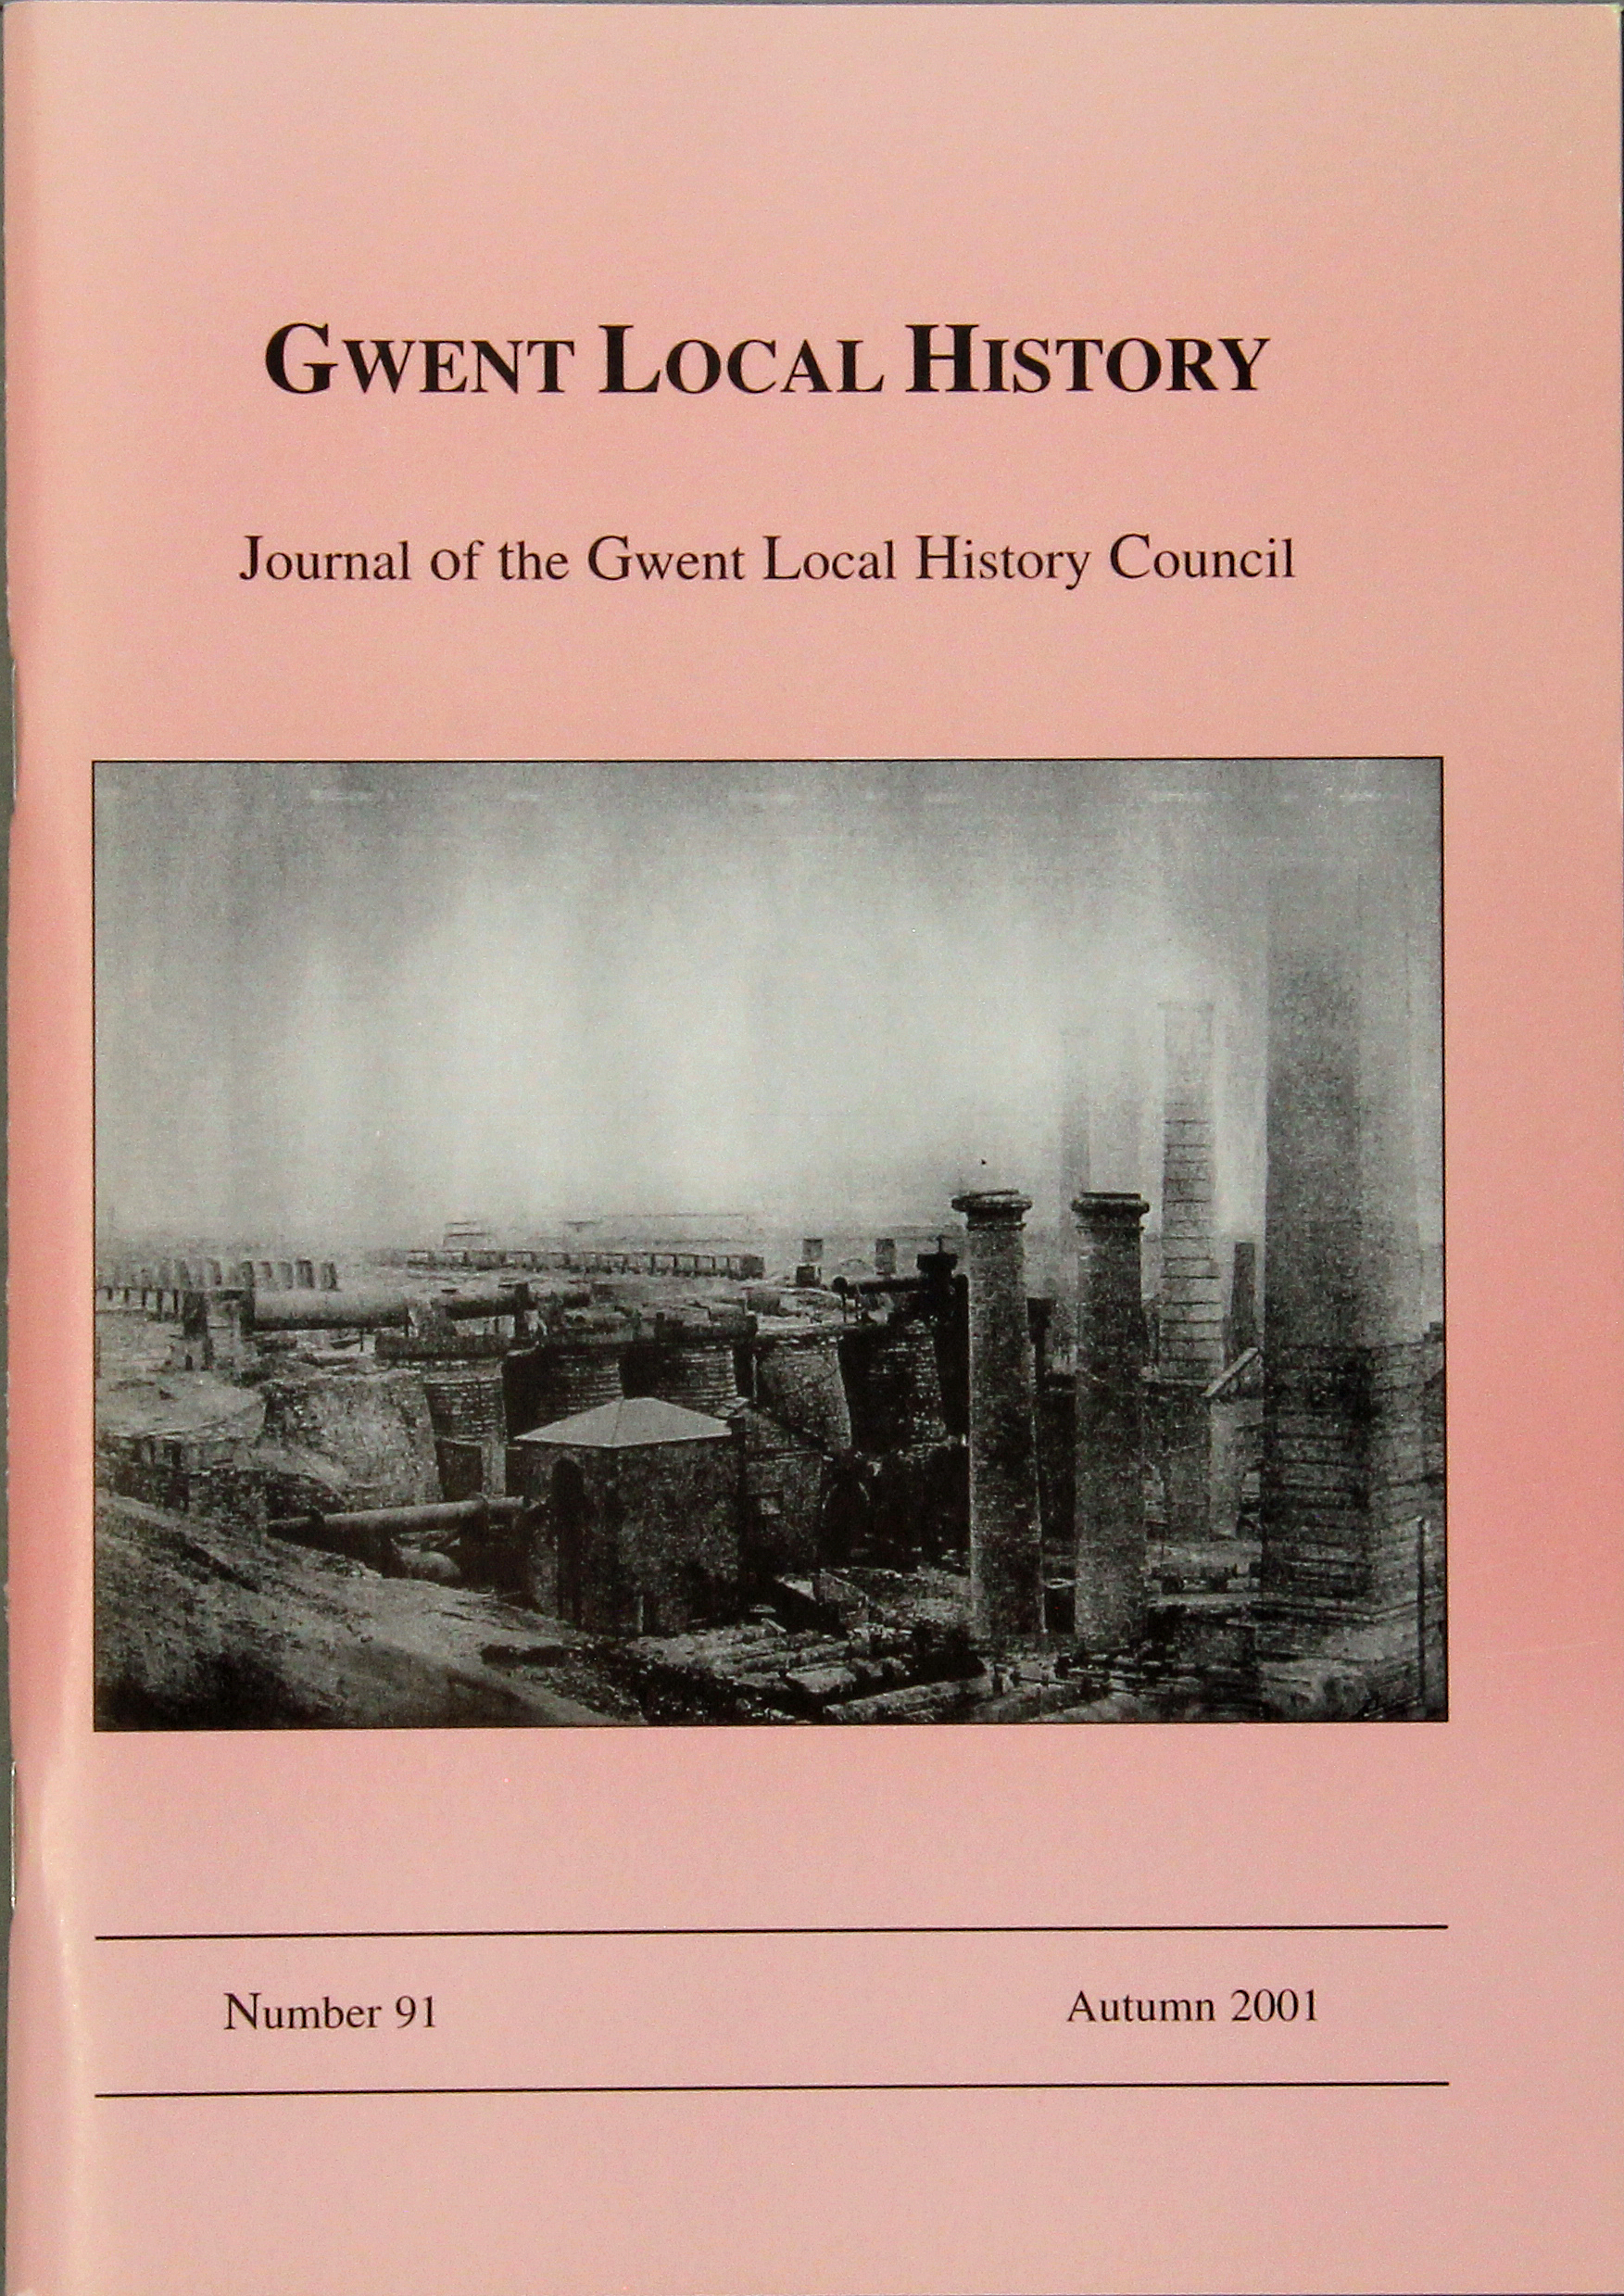 Gwent Local History: Journal of the Gwent Local History Council No.91, Autumn 2001, £2.00